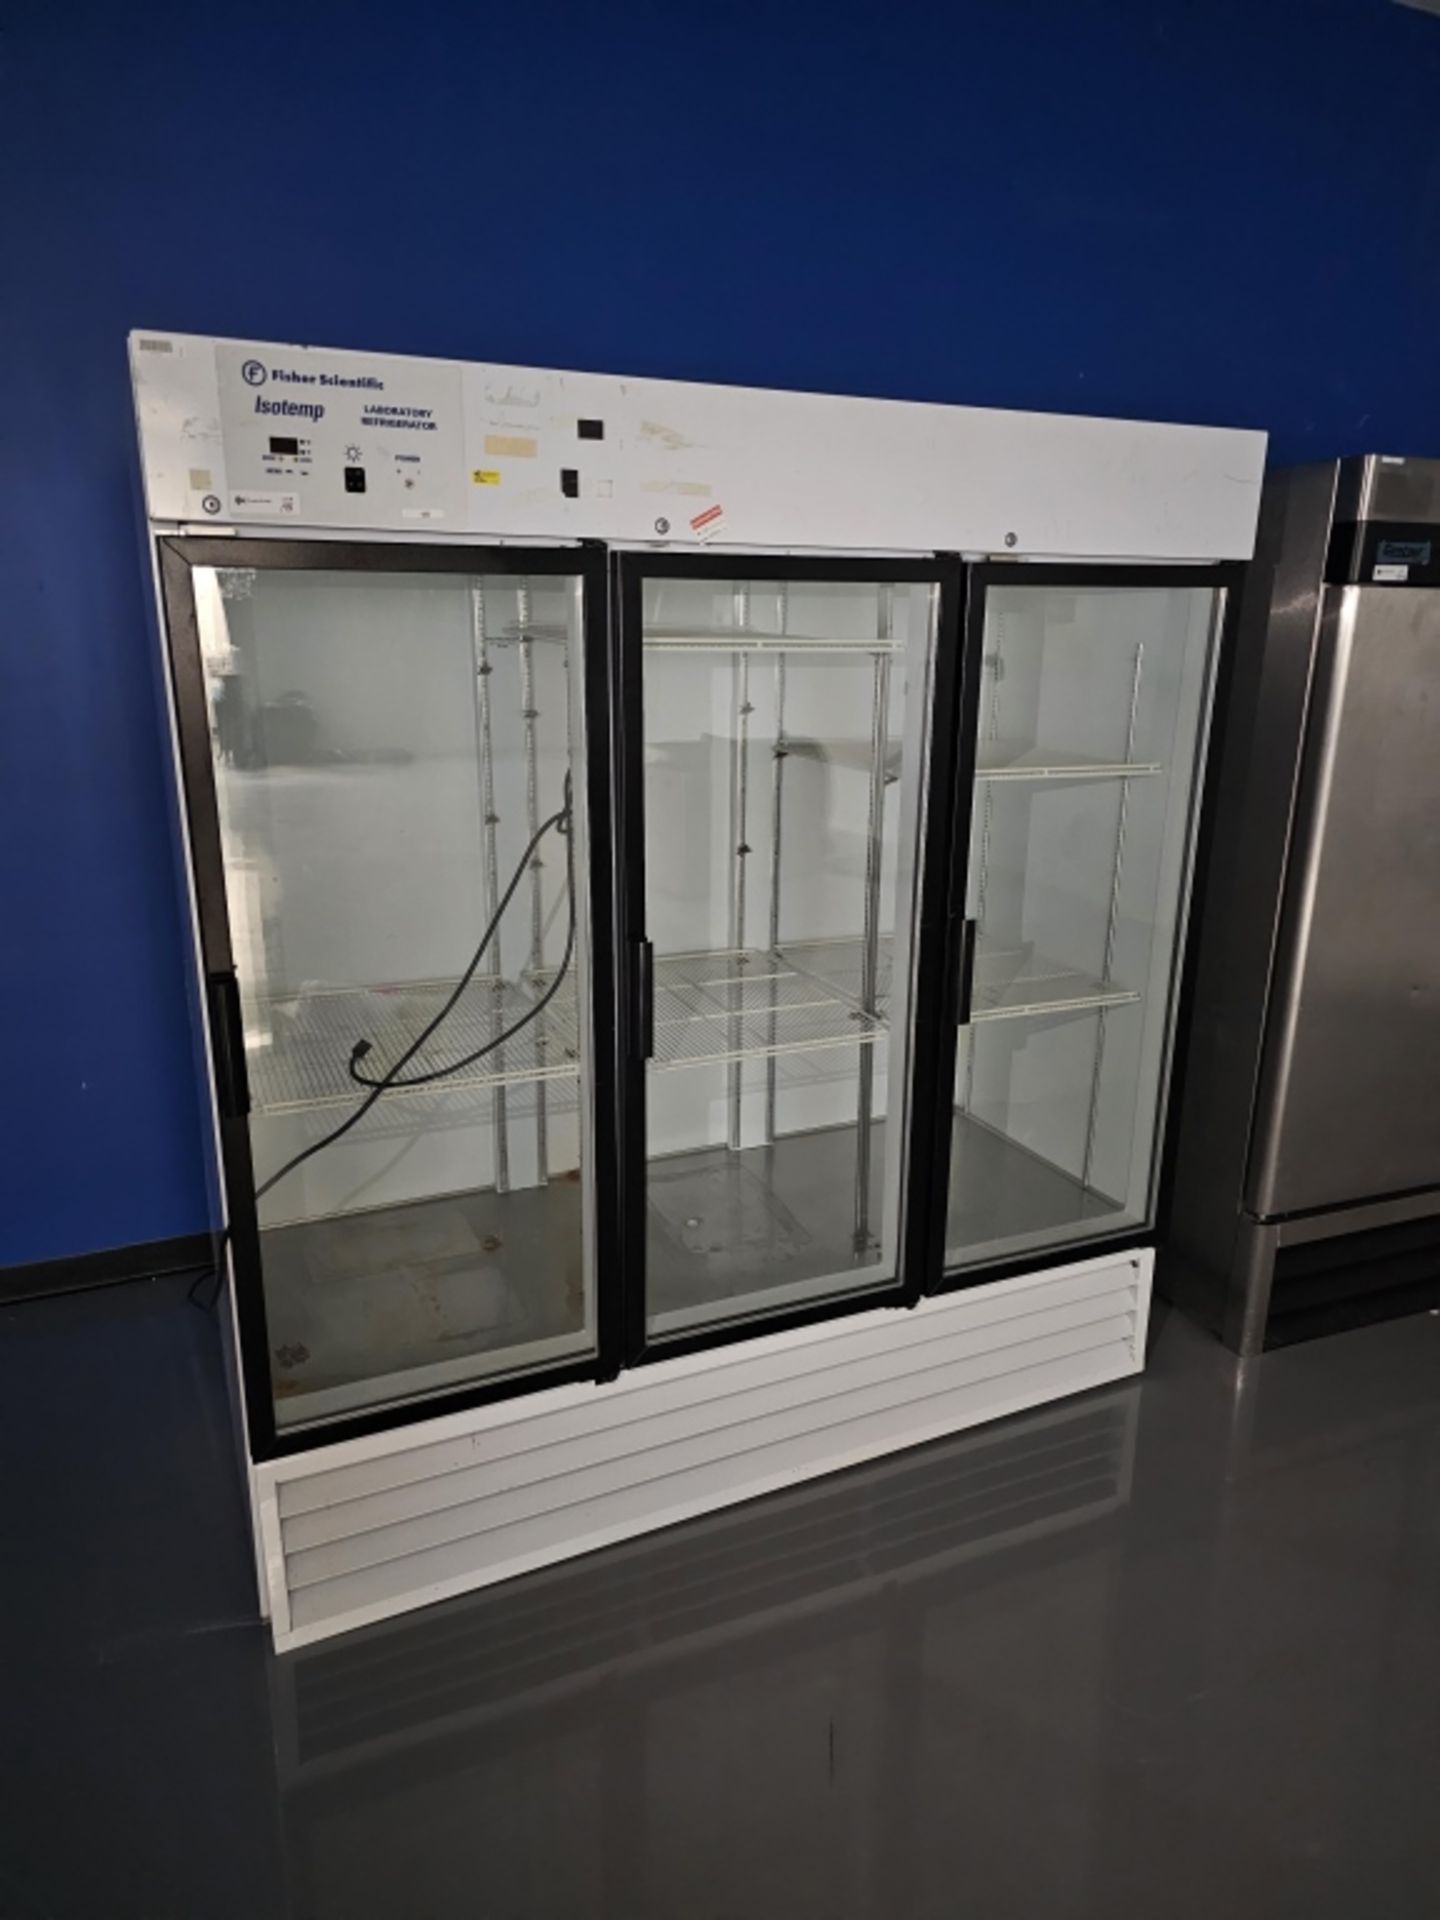 Fisher Scientific Isotemp 72 Cubic Ft 3-Door Glass Front Refrigerator - Image 3 of 5